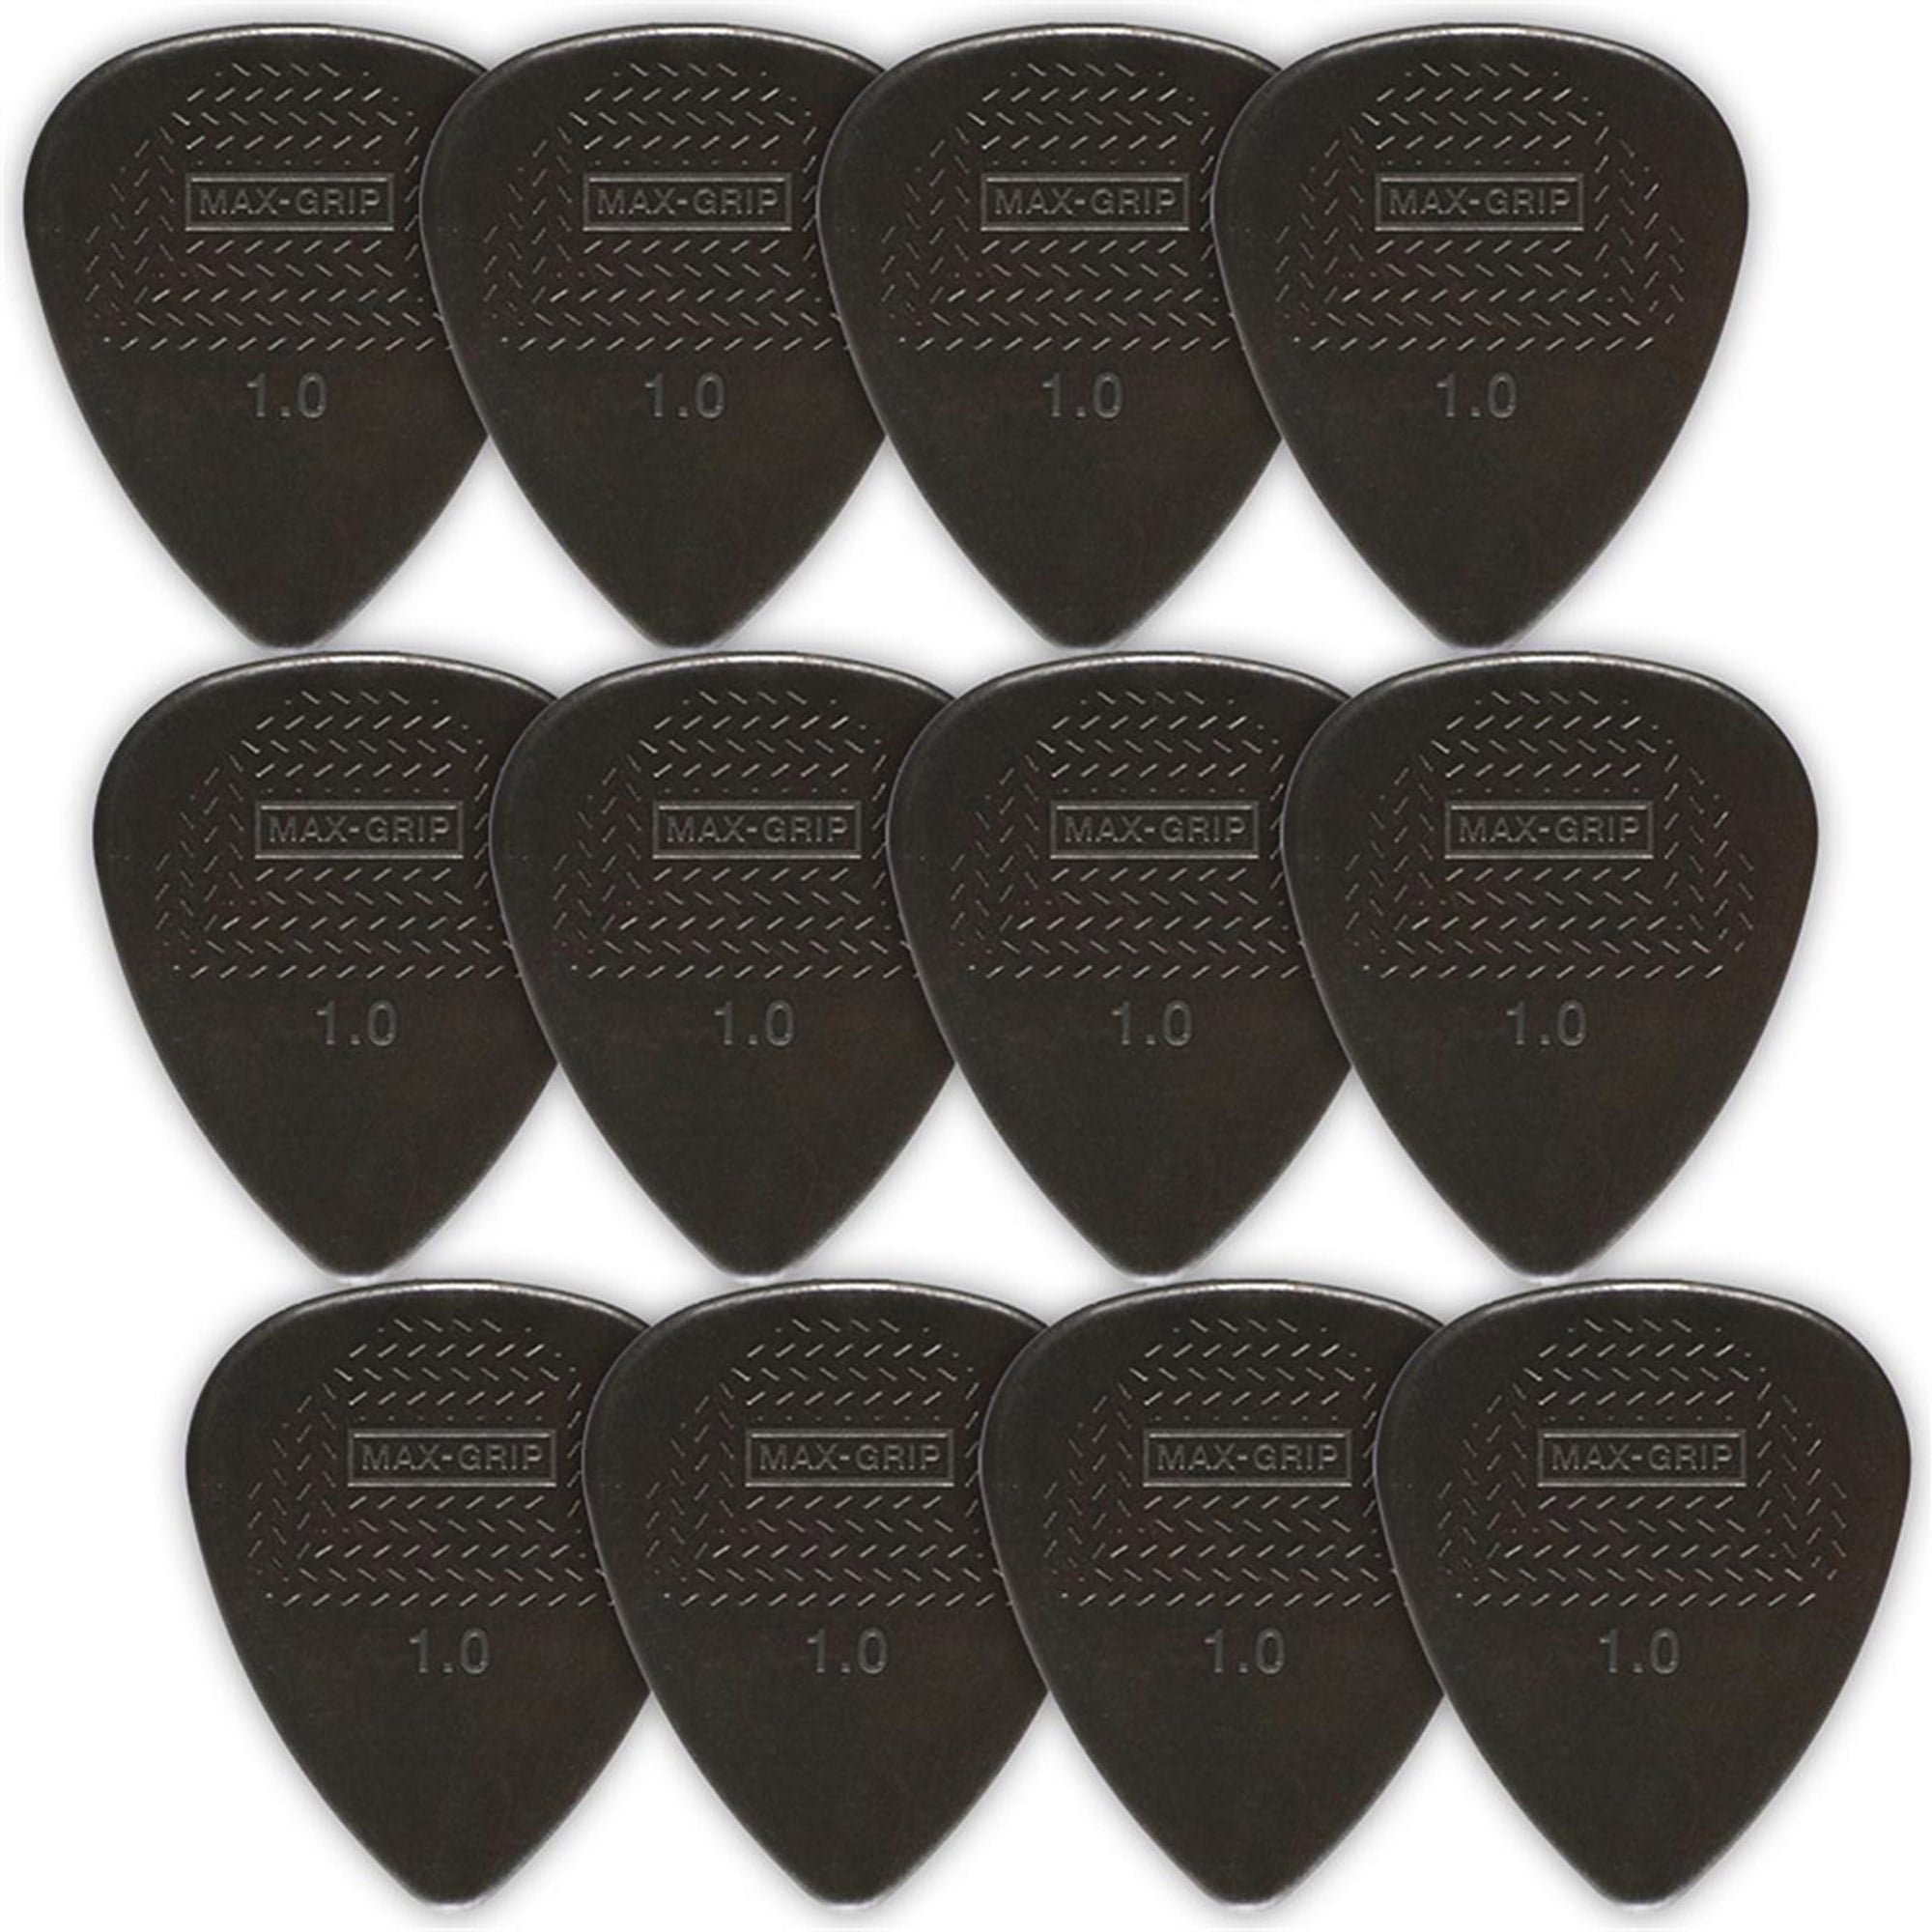 Donner Celluloid Guitar Picks with Case - Pack of 16